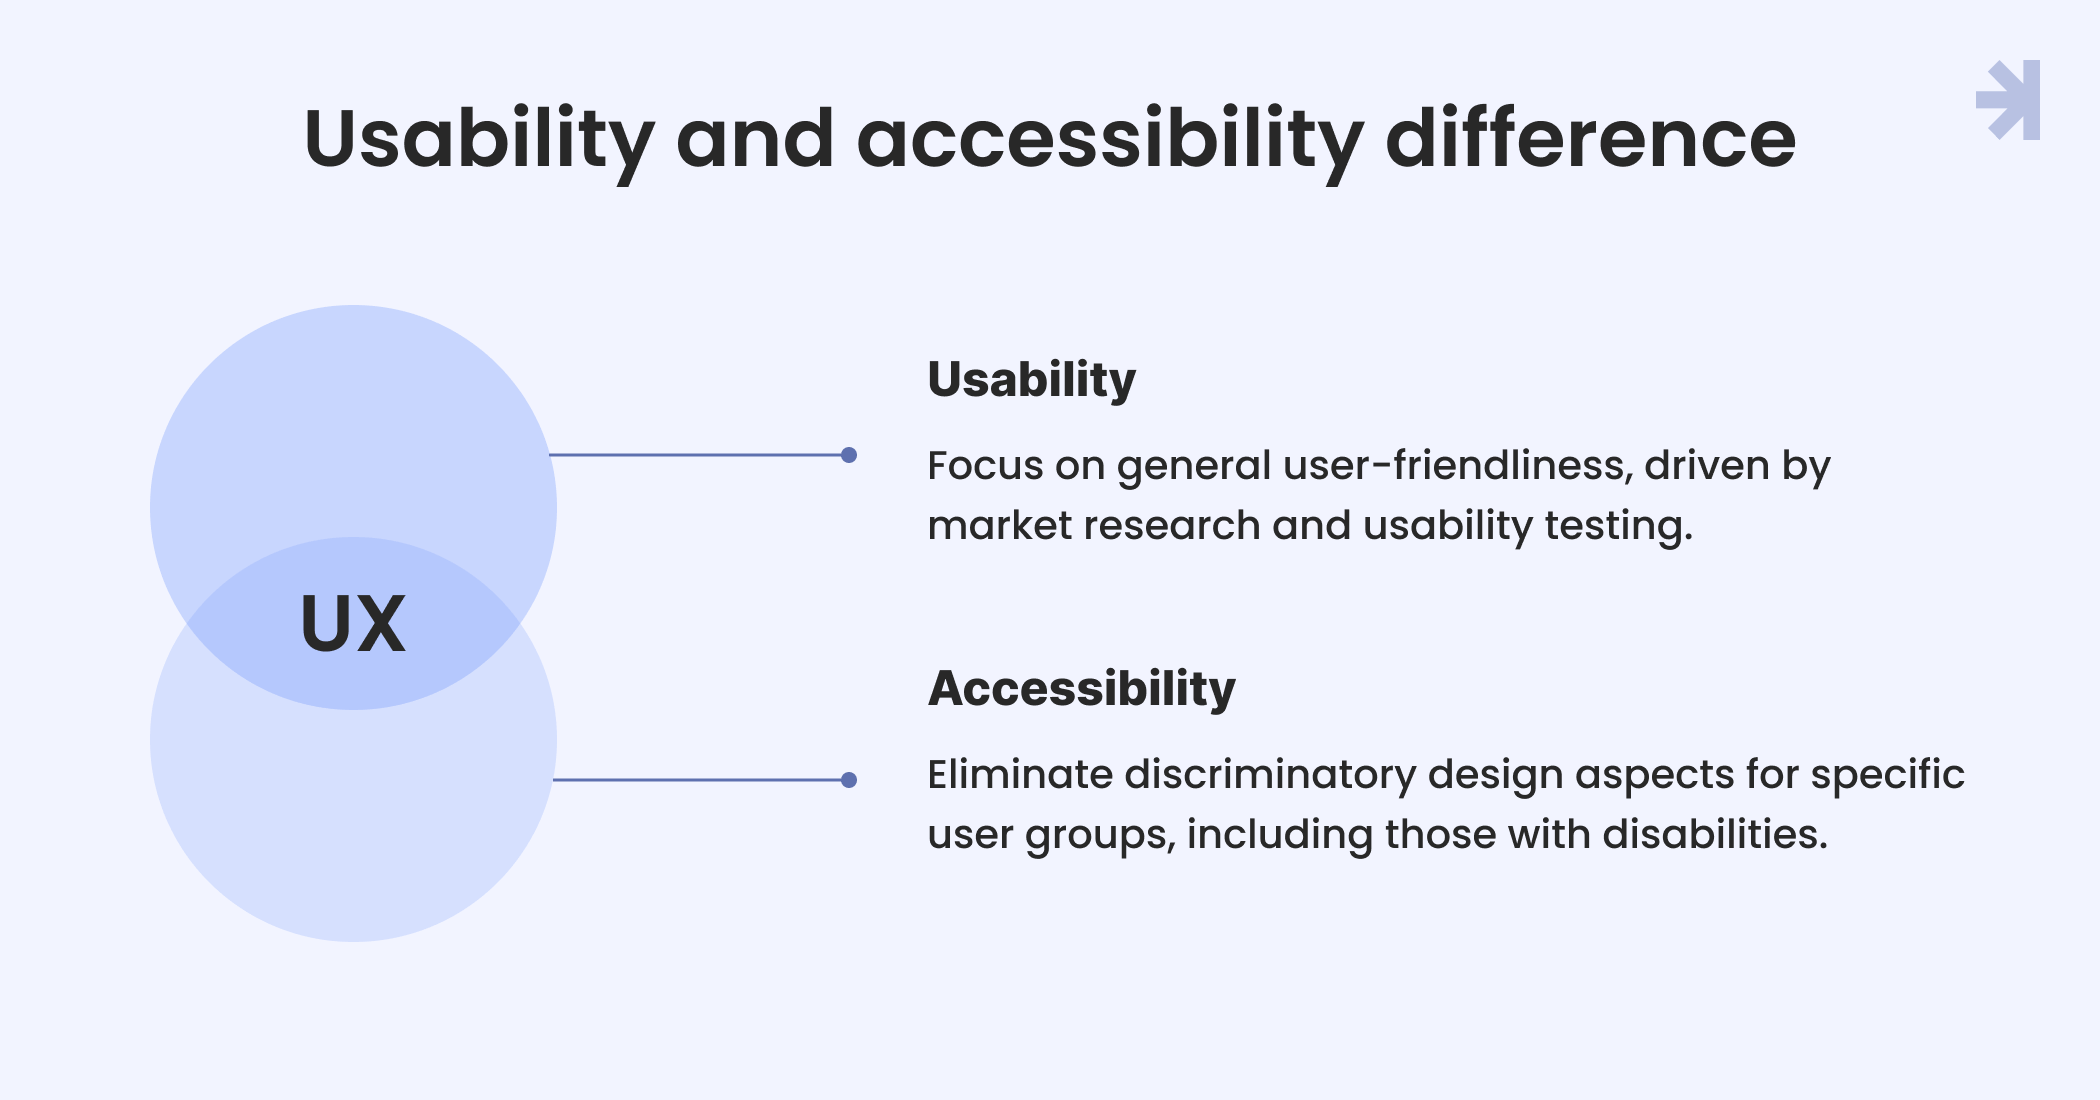 How do usability and accessibility differ from each other?